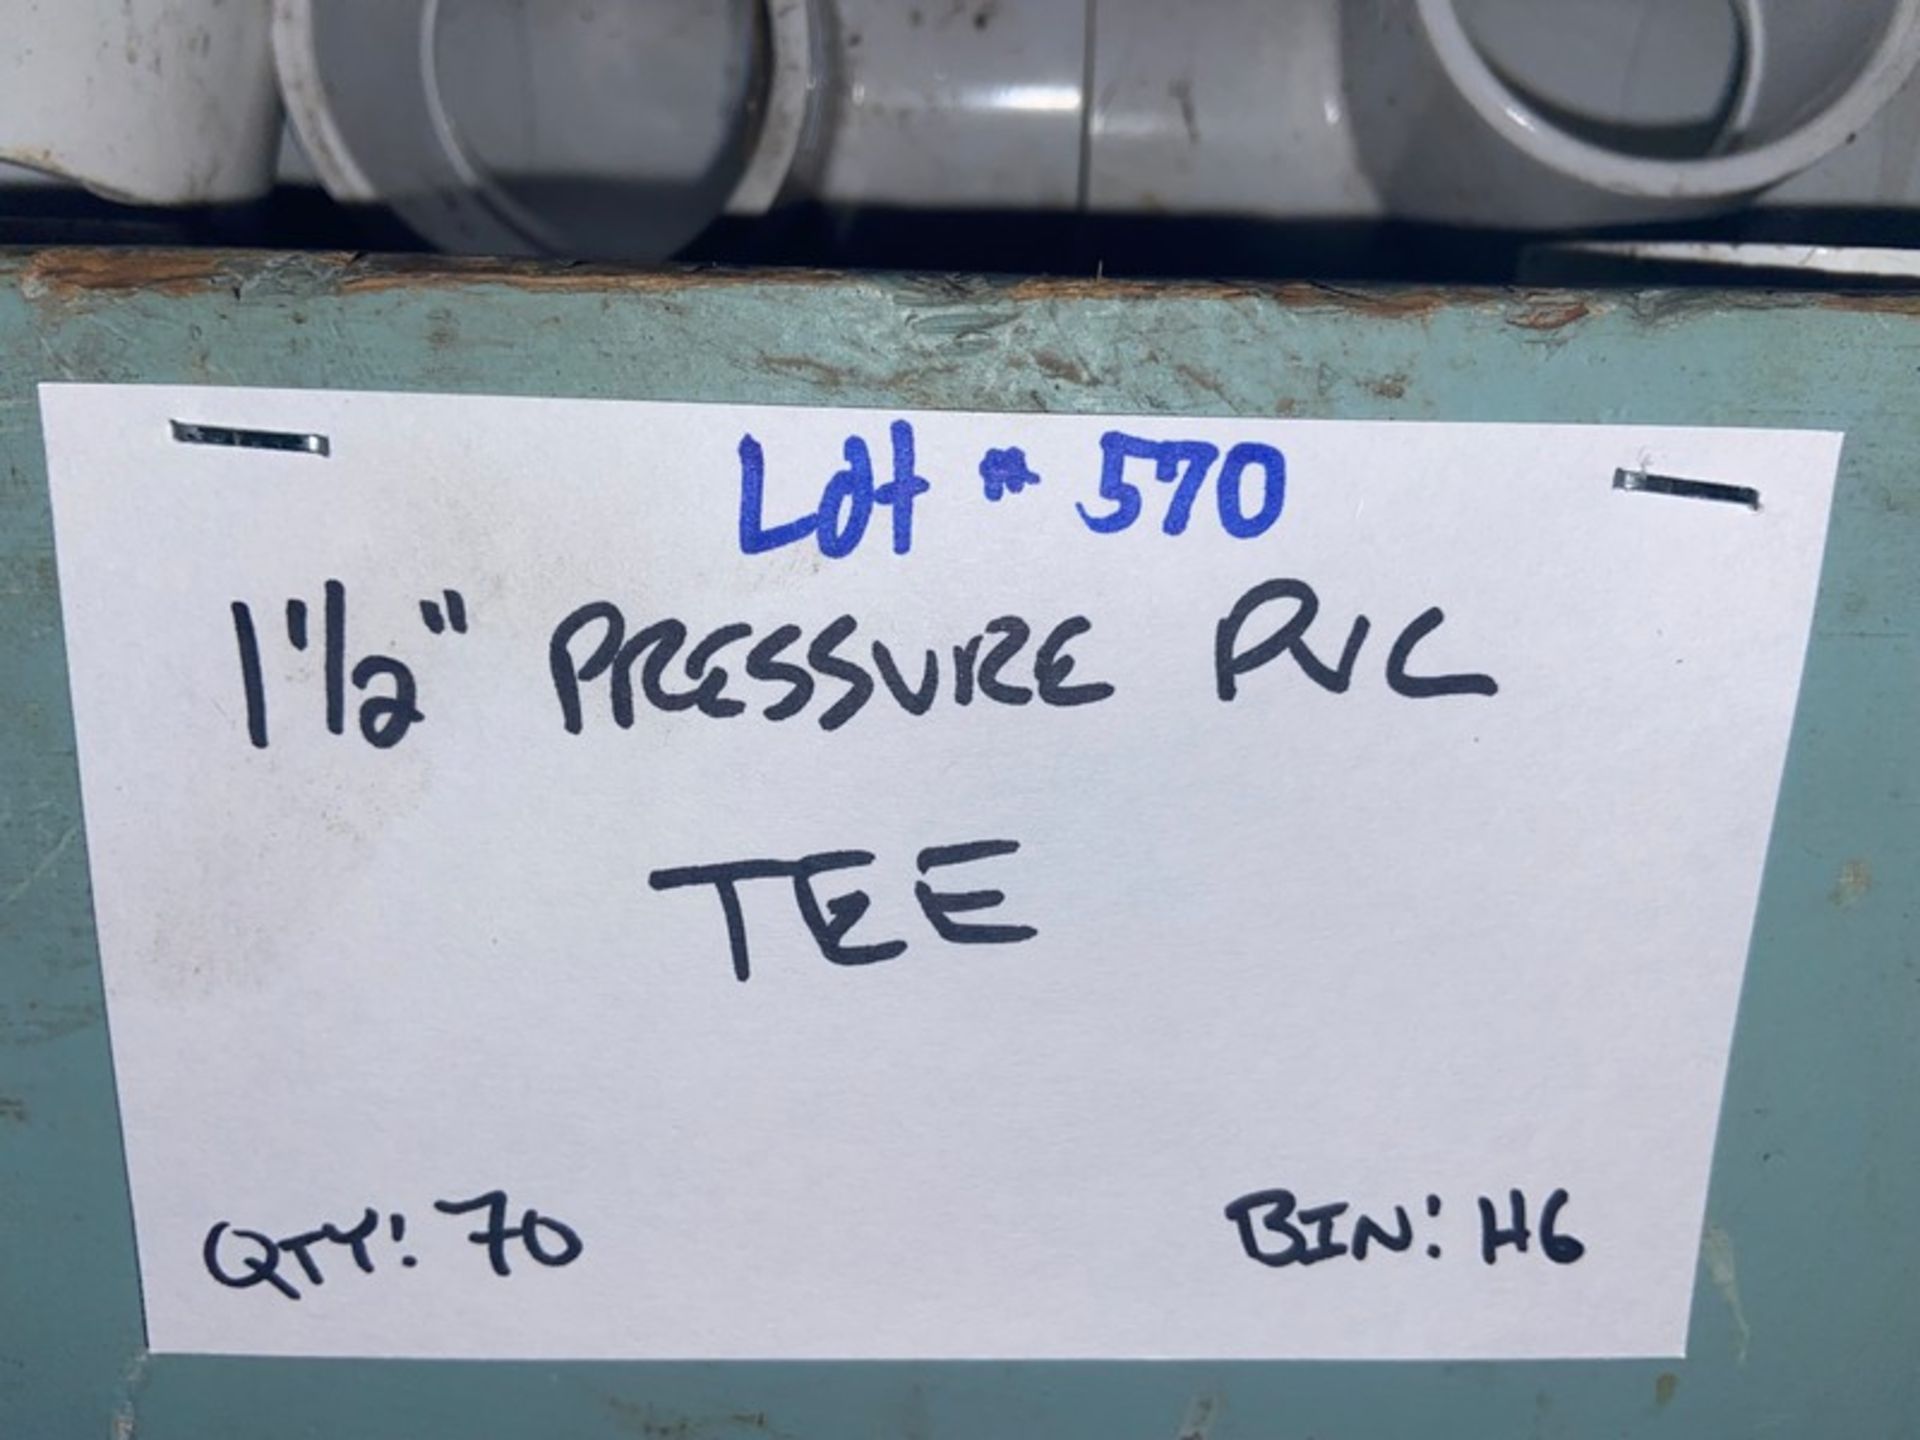 (70) 1-1/2" Pressure PVC Tee (Bin: H6) (LOCATED IN MONROEVILLE, PA) - Image 4 of 6